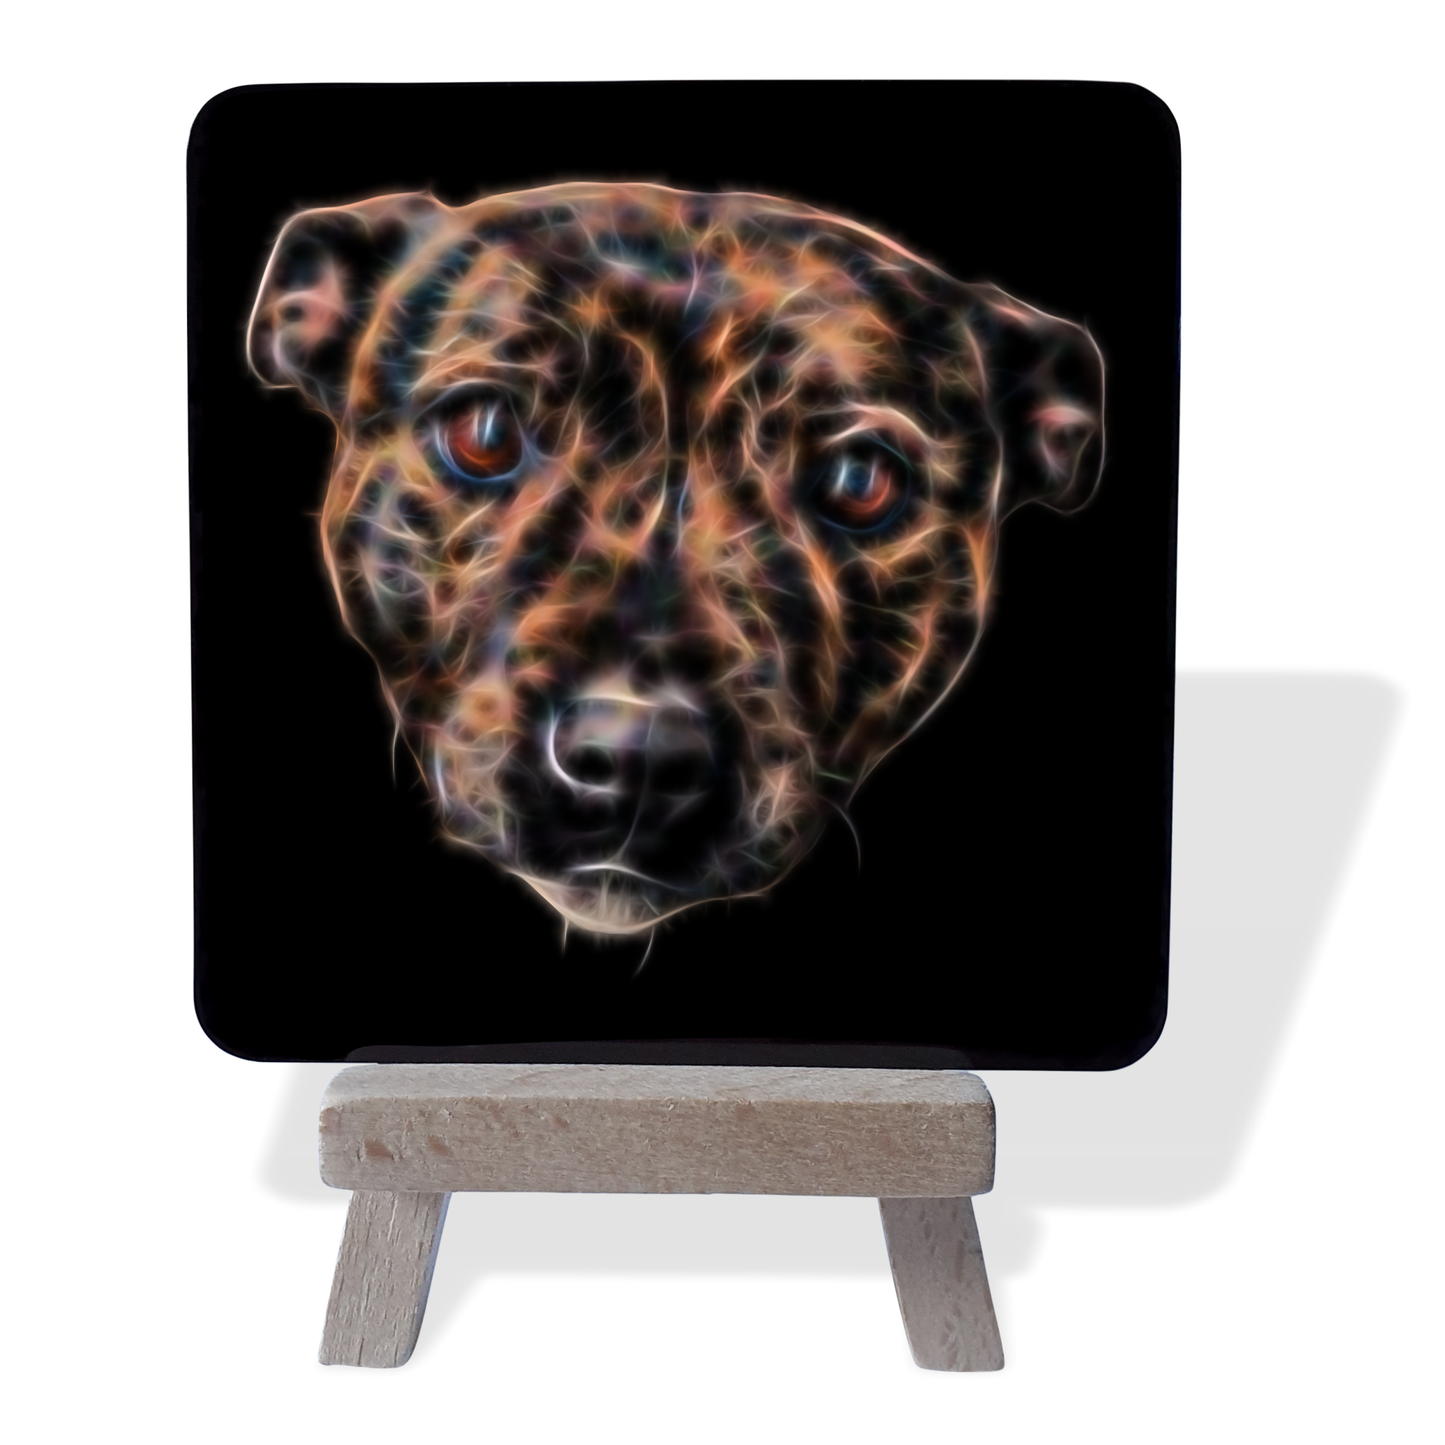 Staffie - Brindle Staffordshire Bull Terrier #1 Metal Plaque and Mini Easel with Fractal Art Design